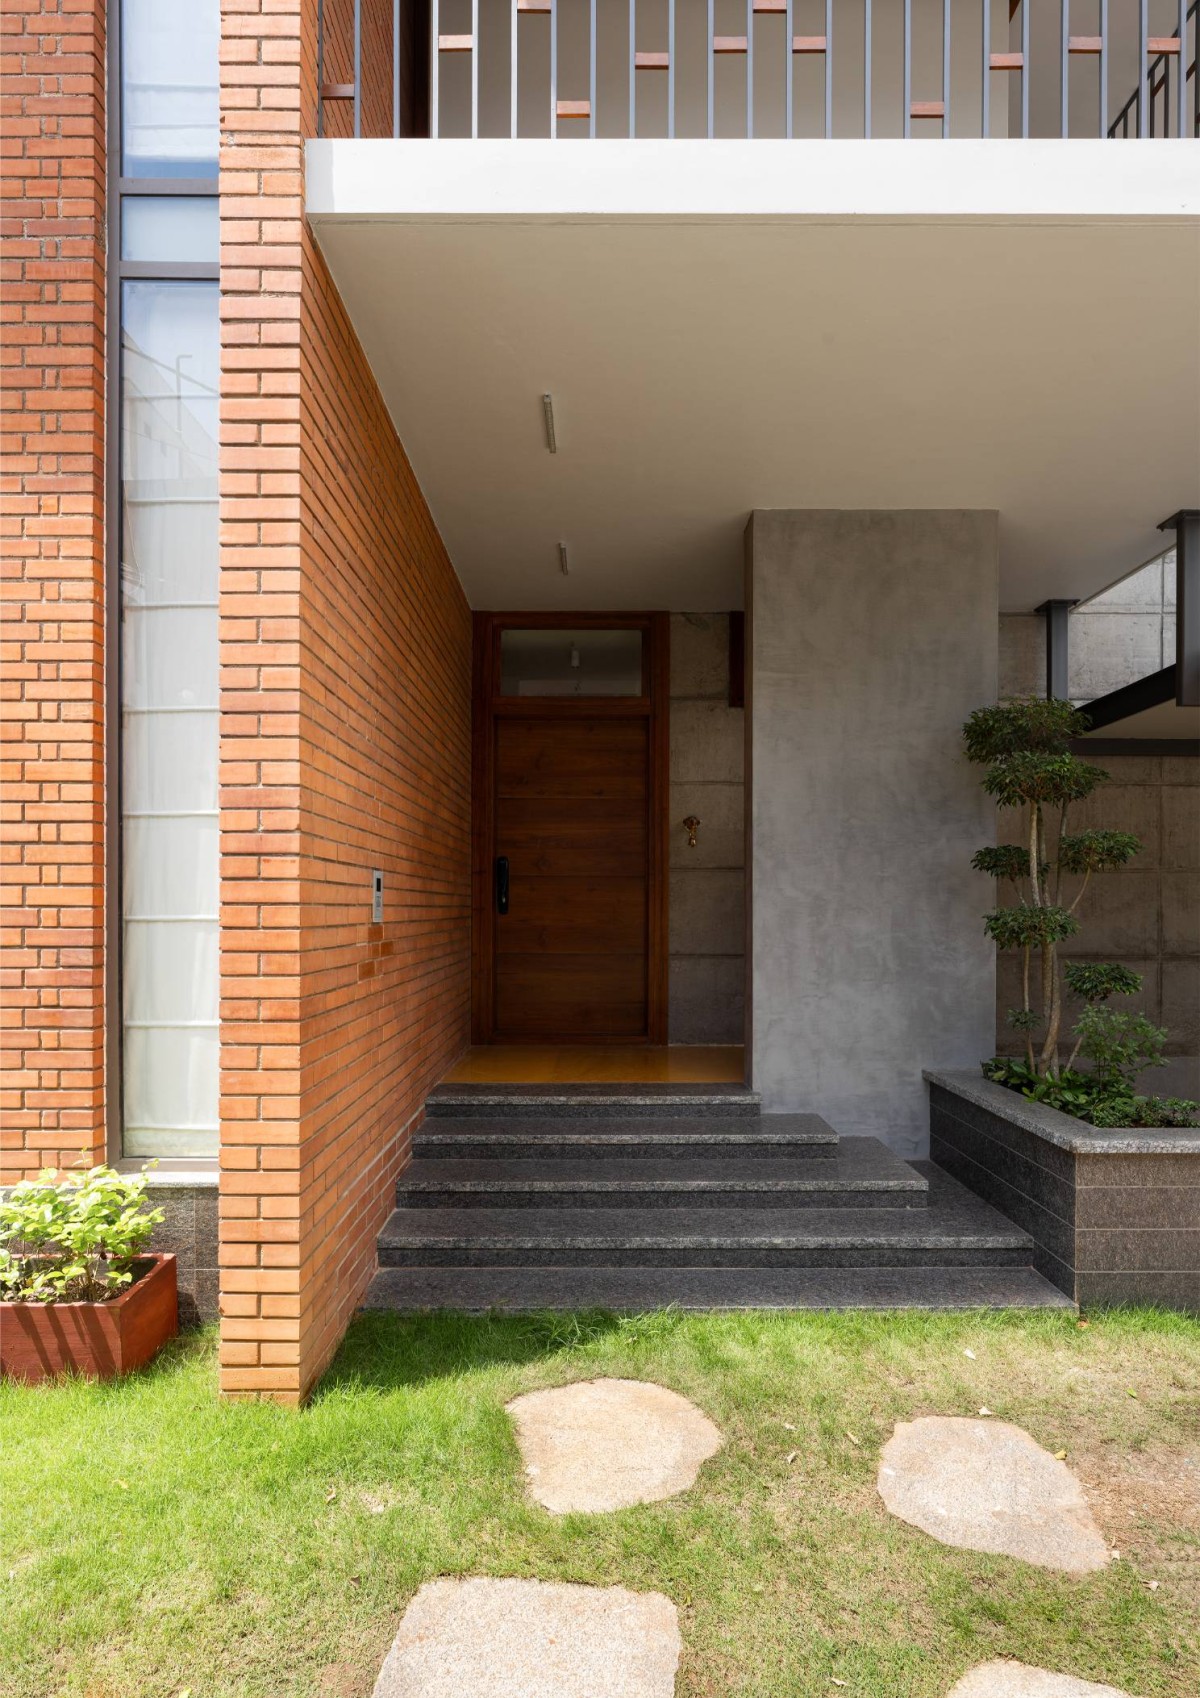 Entrance of Carving a COURT OF QUIETUDE in a Bustling Cityscape by Mudbricks Architects